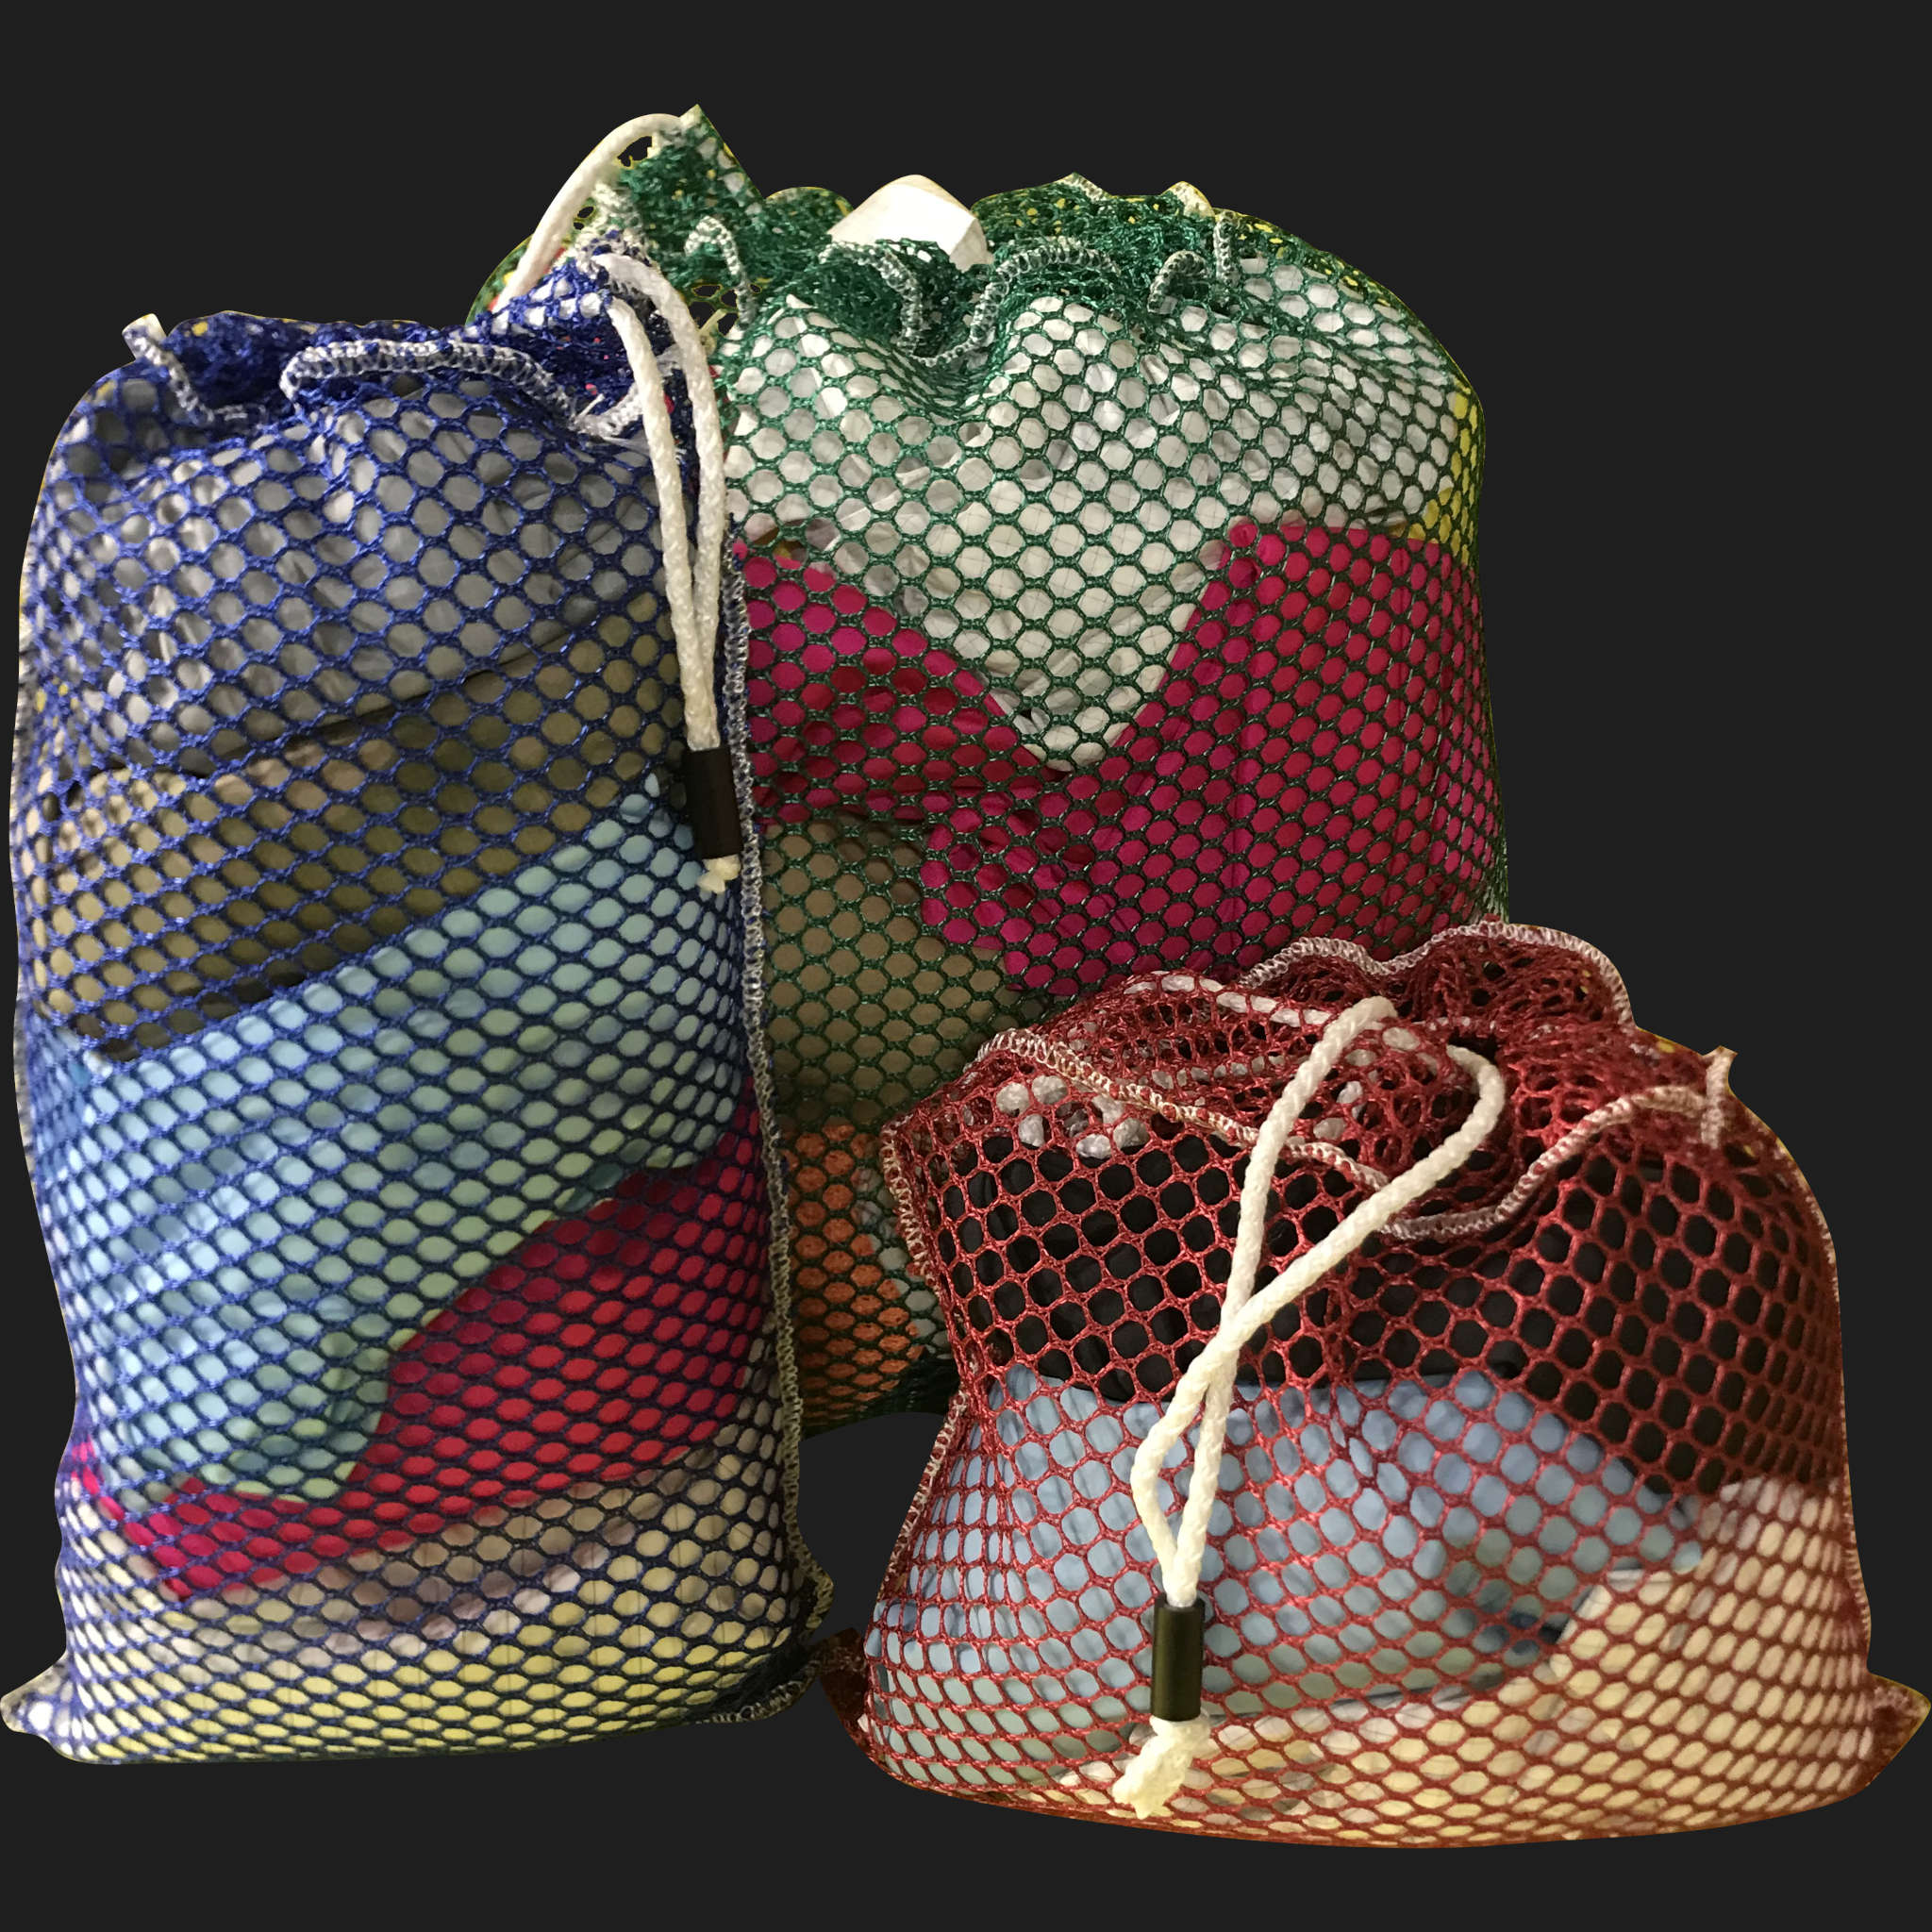 20" x 38" Customized Mesh-Net-Laundry Bags Heavy Duty with Cord and barrellock closure